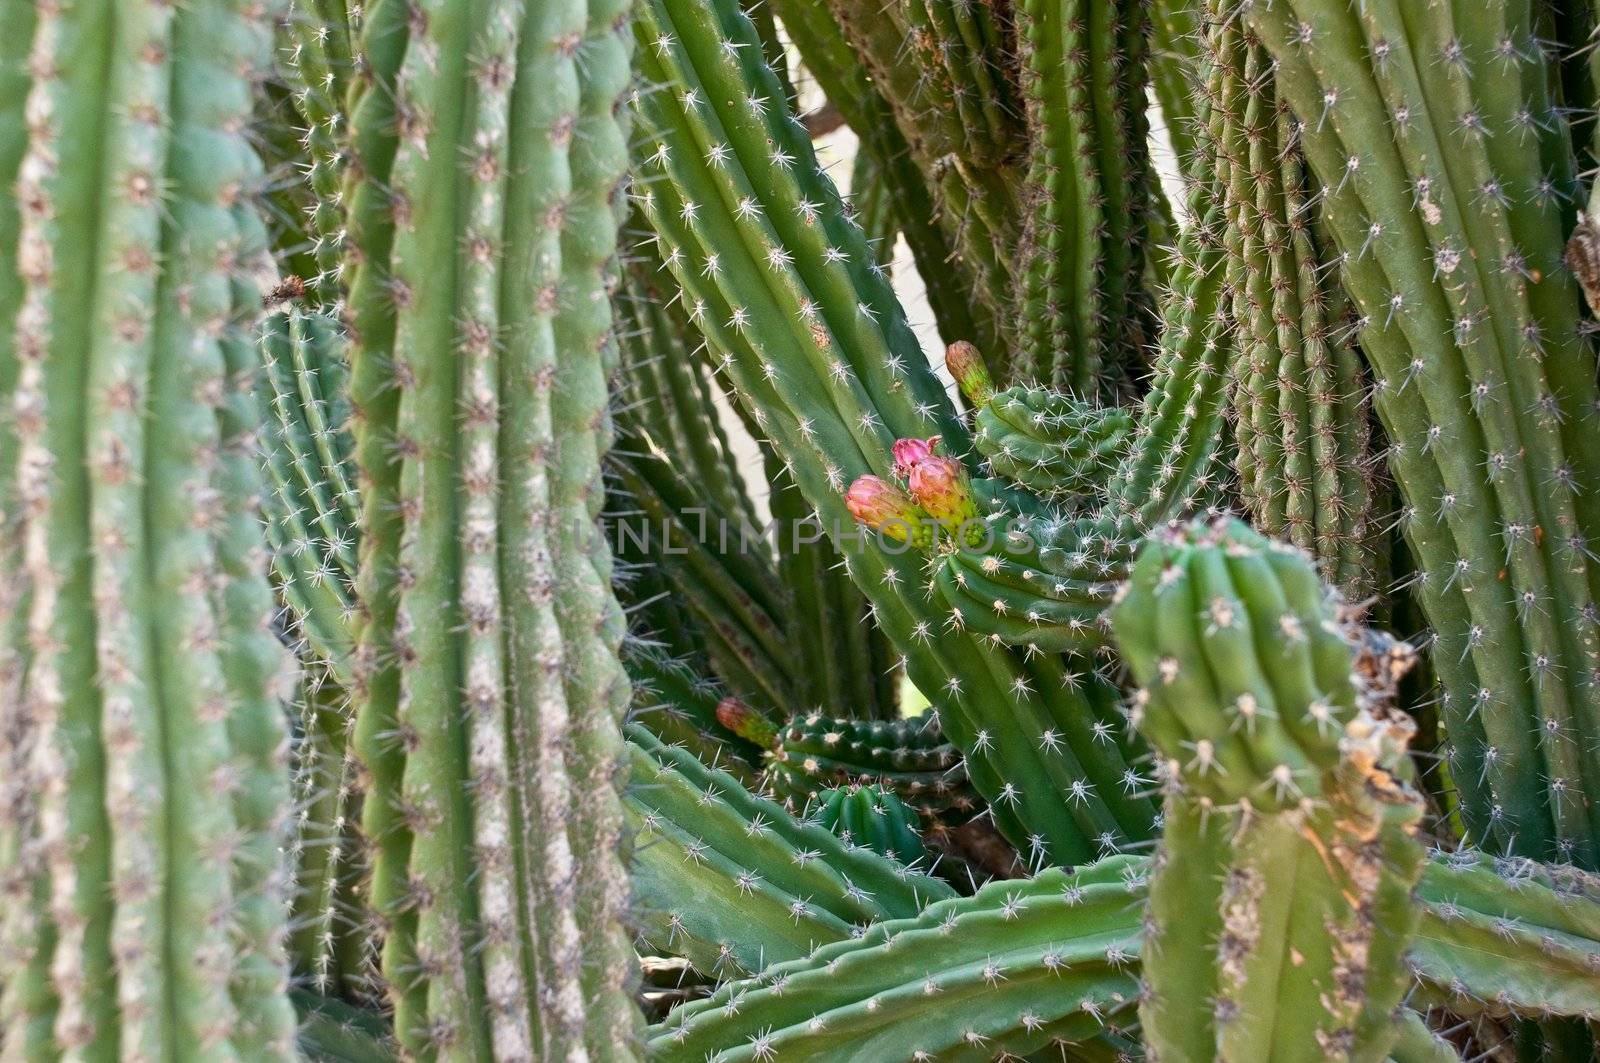 Cactus by trunion